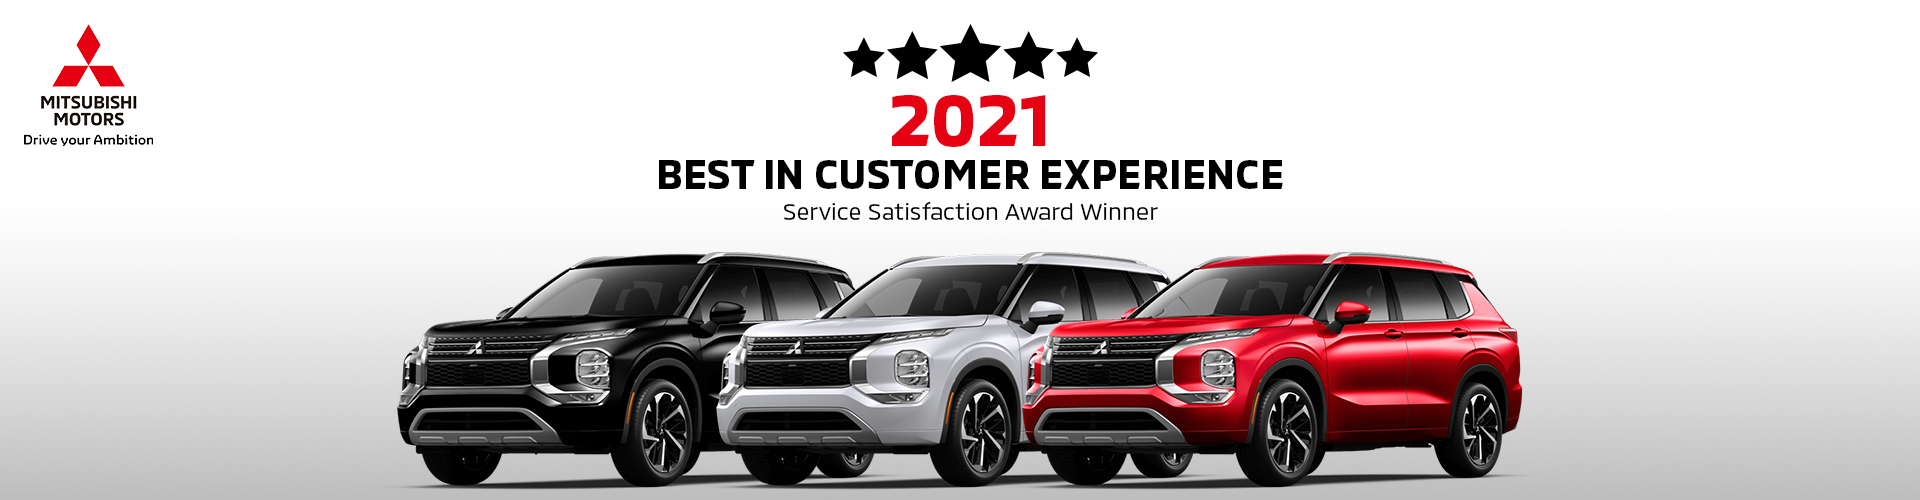 Best In Customer Experience  | St Cloud, MN